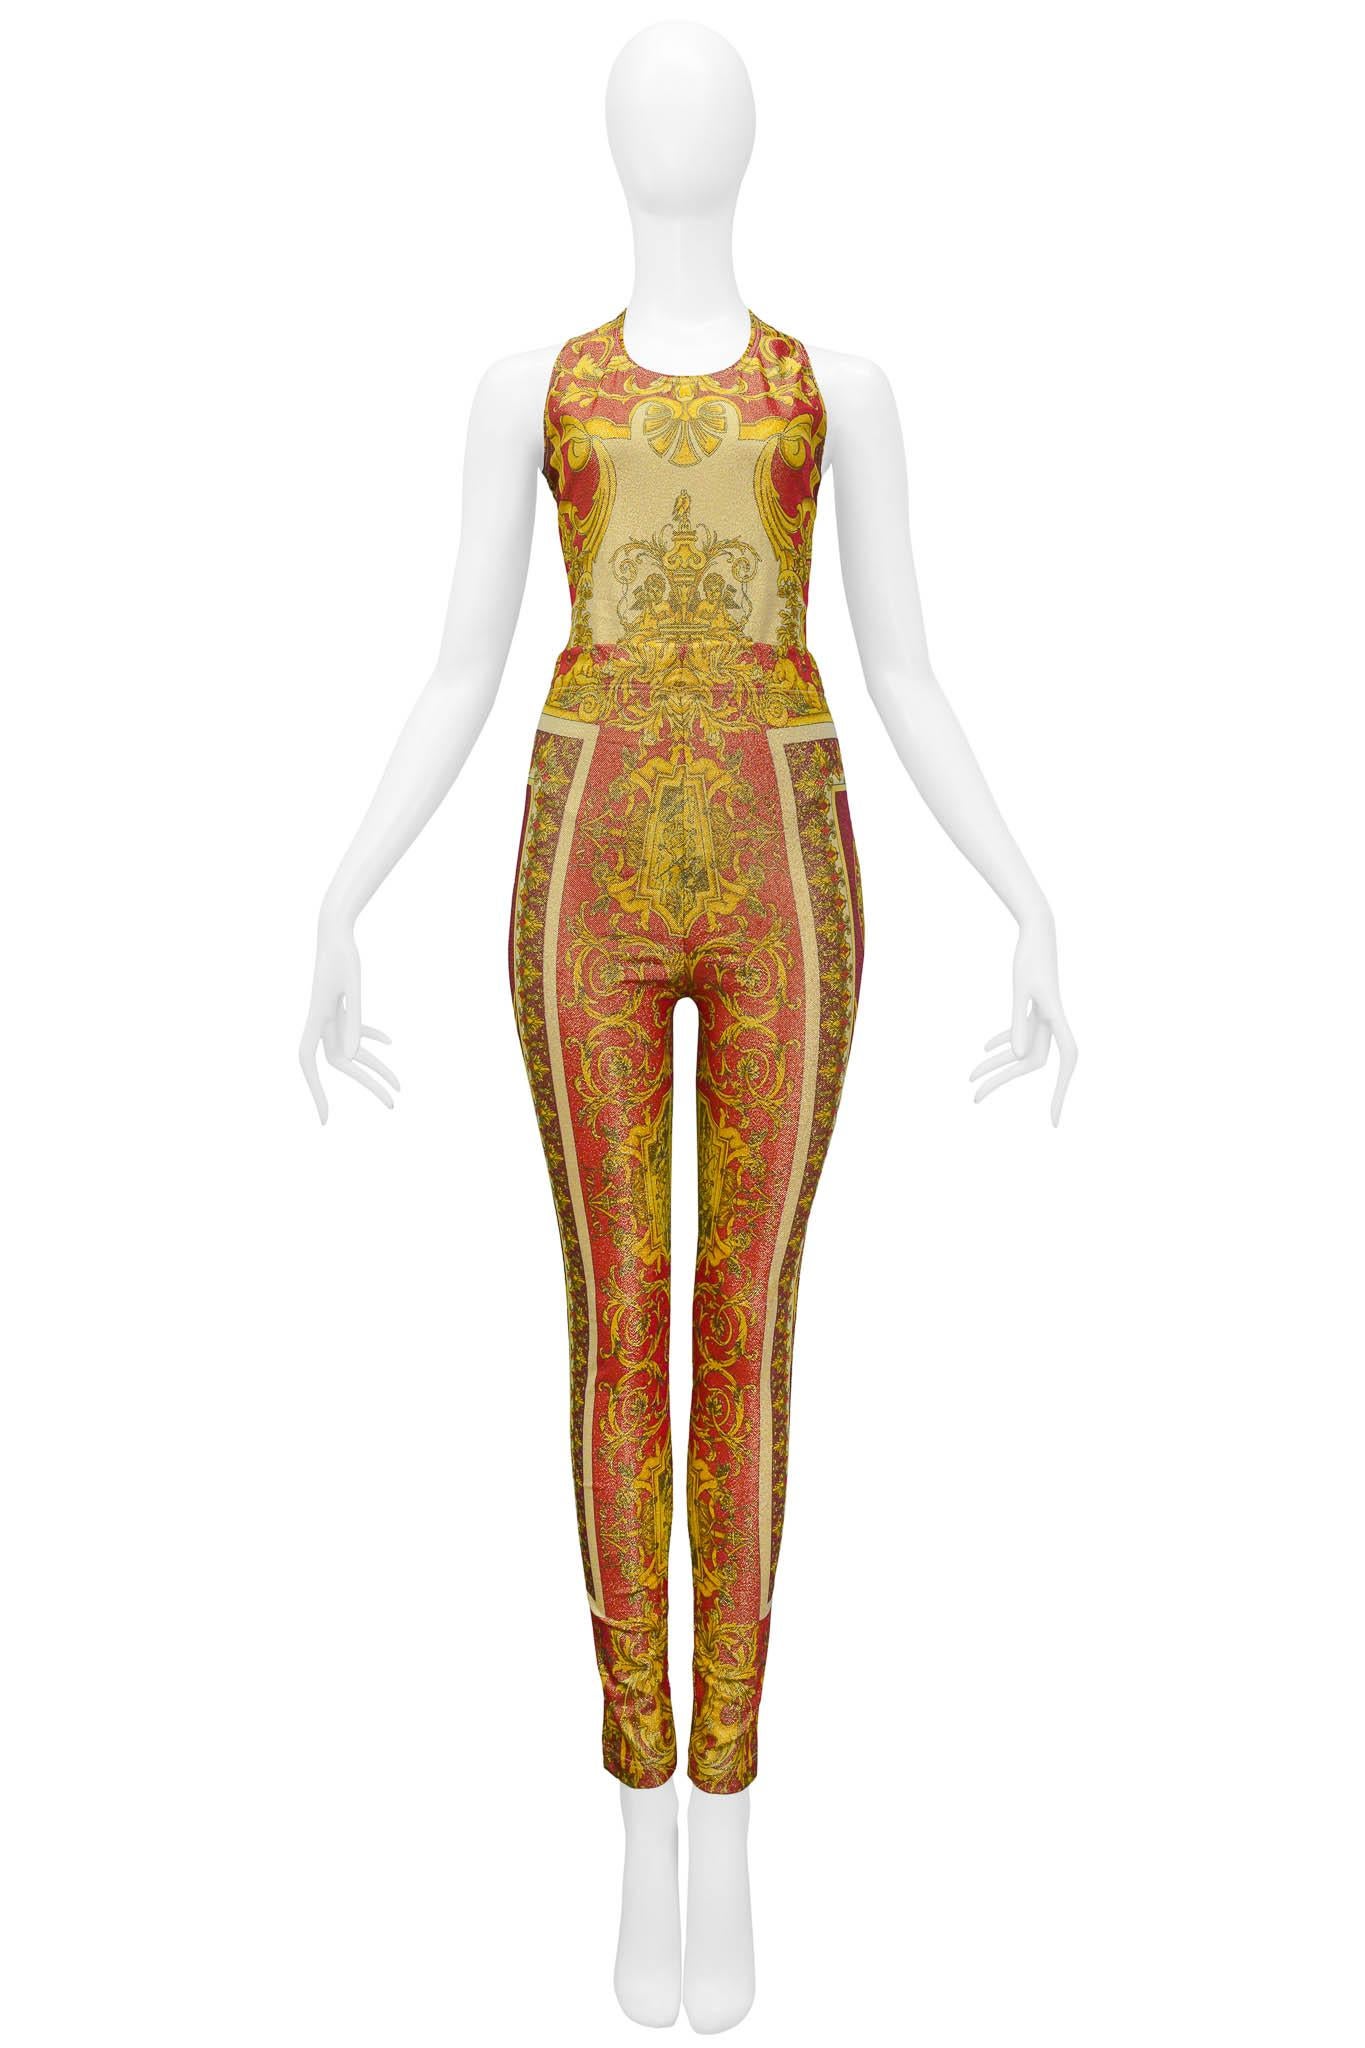 Resurrection Vintage is excited to offer a Versace 1992 red and gold stretchy bodysuit and pant ensemble featuring a baroque ornate print on the fabric, an invisible zipper on the back of the bodysuit, and an elastic waistband for the